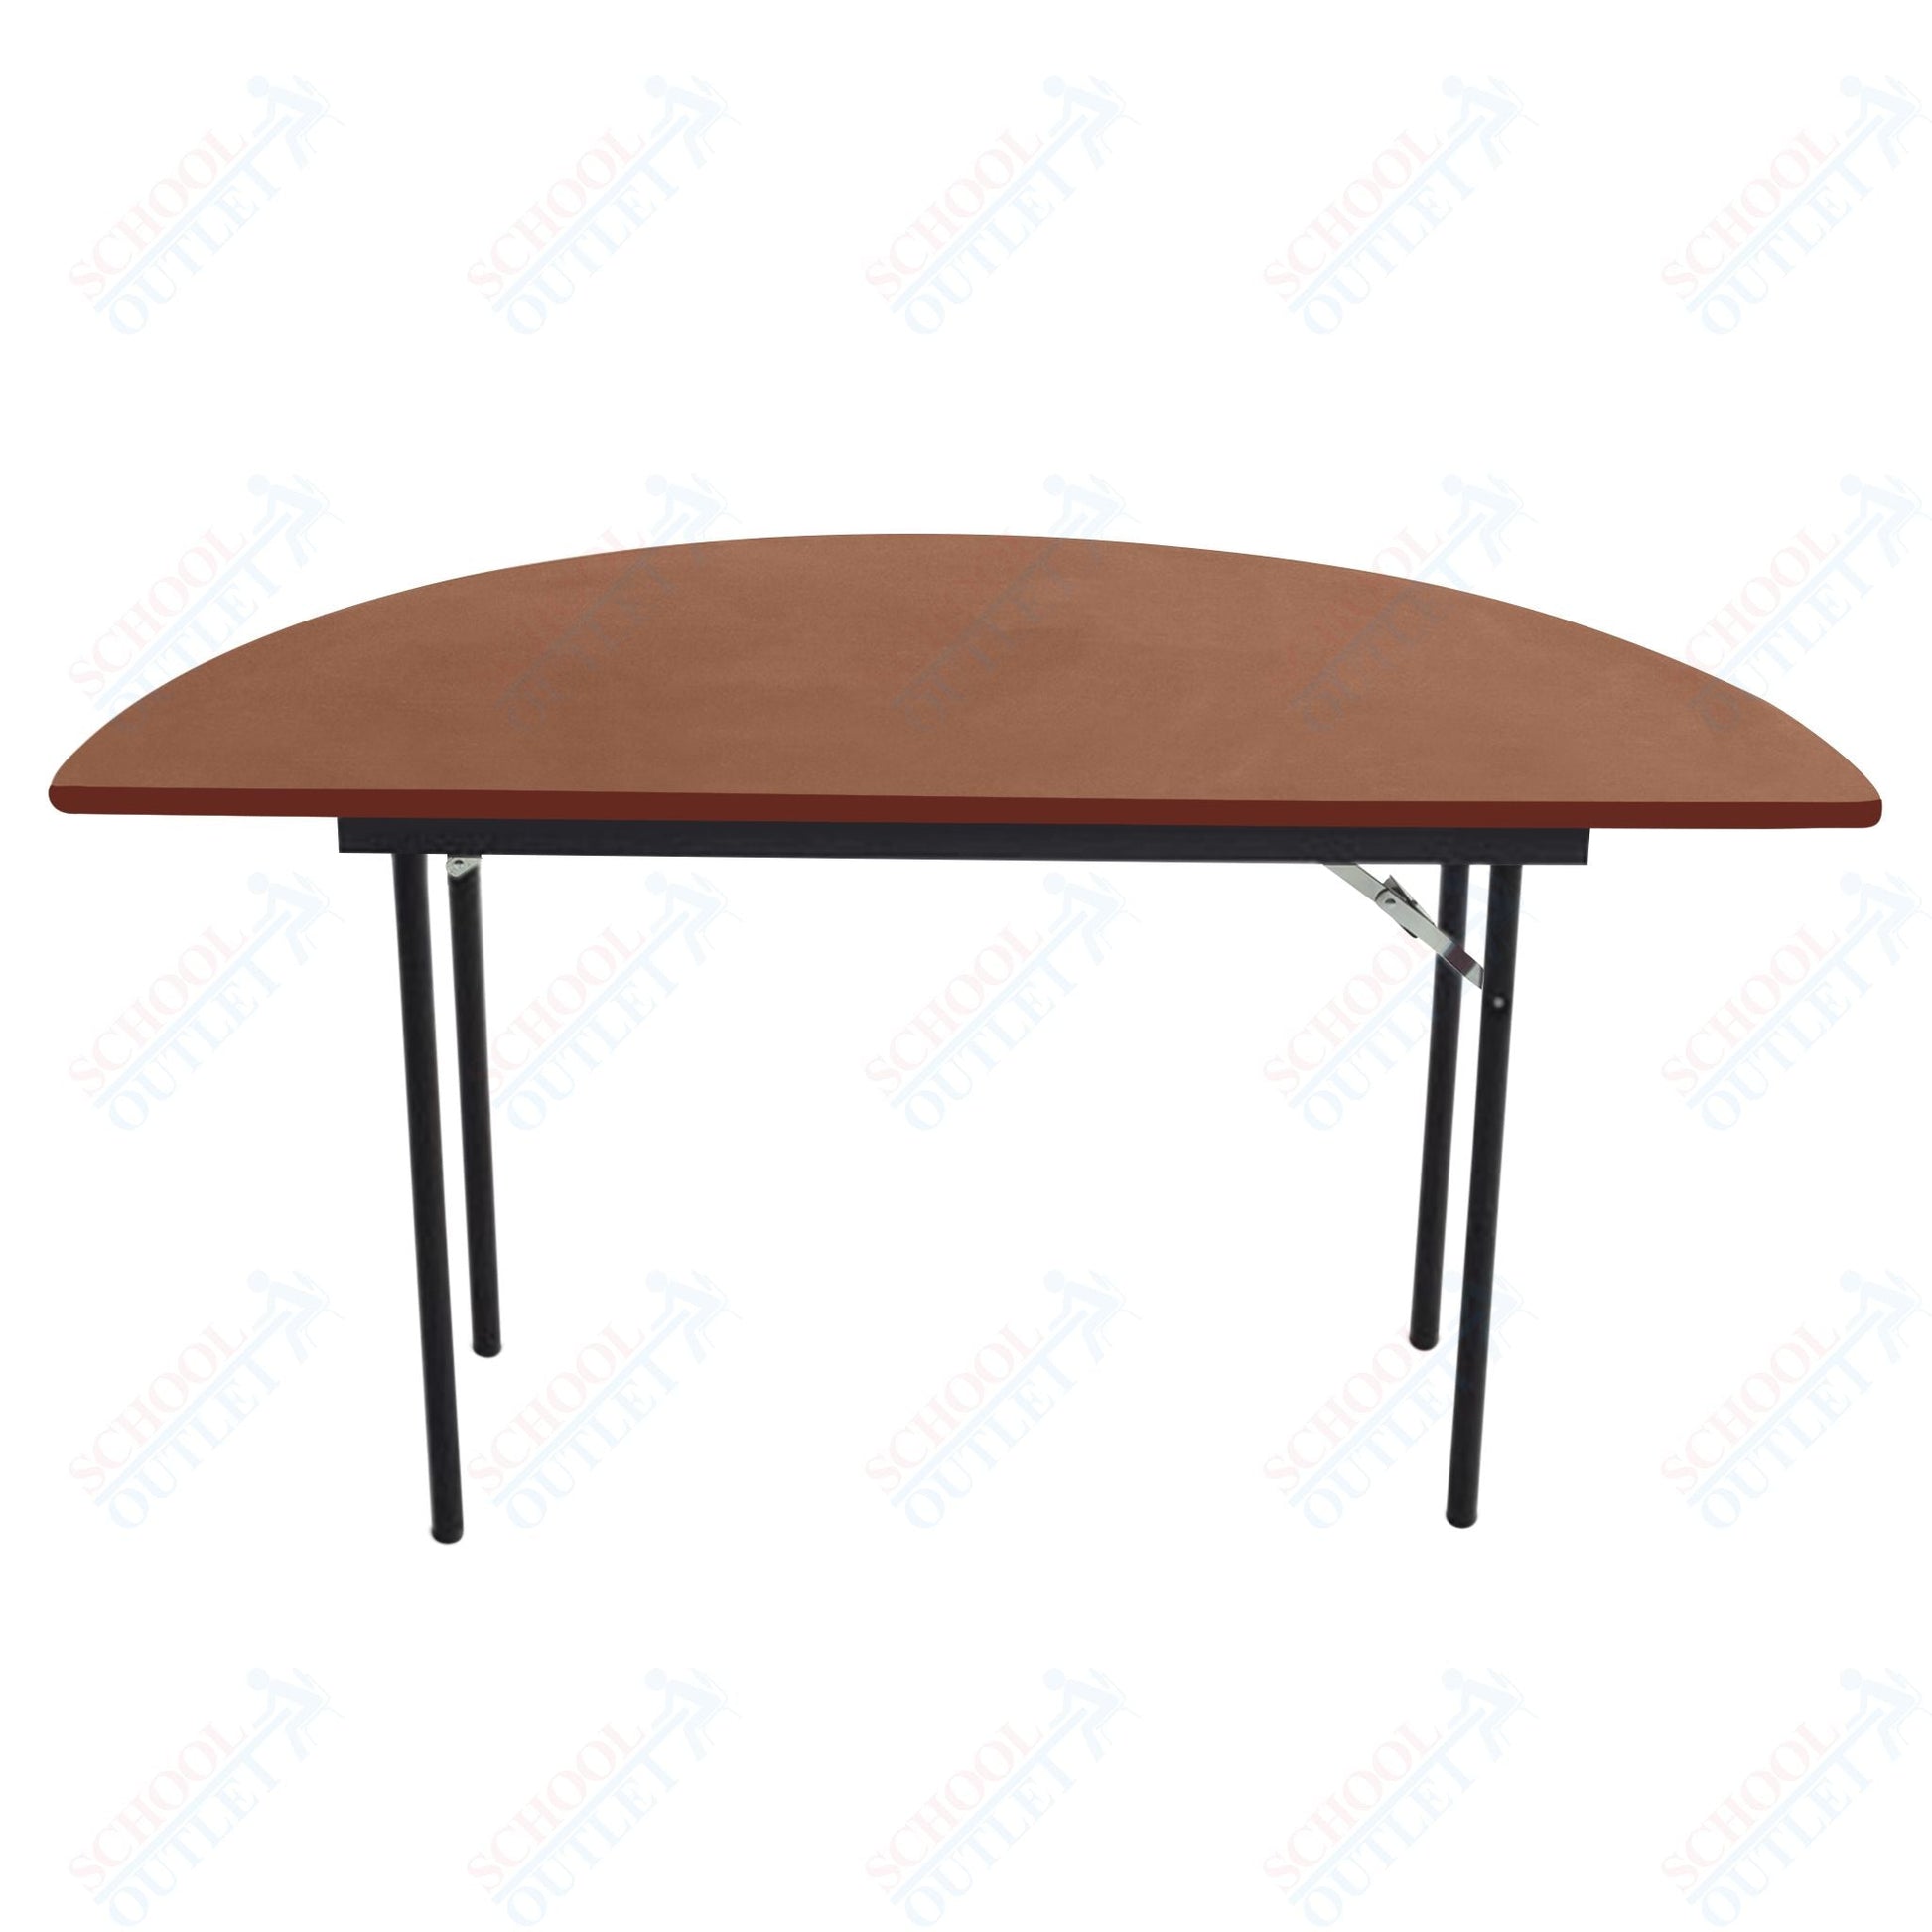 AmTab Folding Table - Plywood Stained and Sealed - Vinyl T - Molding Edge - Half Round - Half 60" Diameter x 29"H (AmTab AMT - HR60PM) - SchoolOutlet